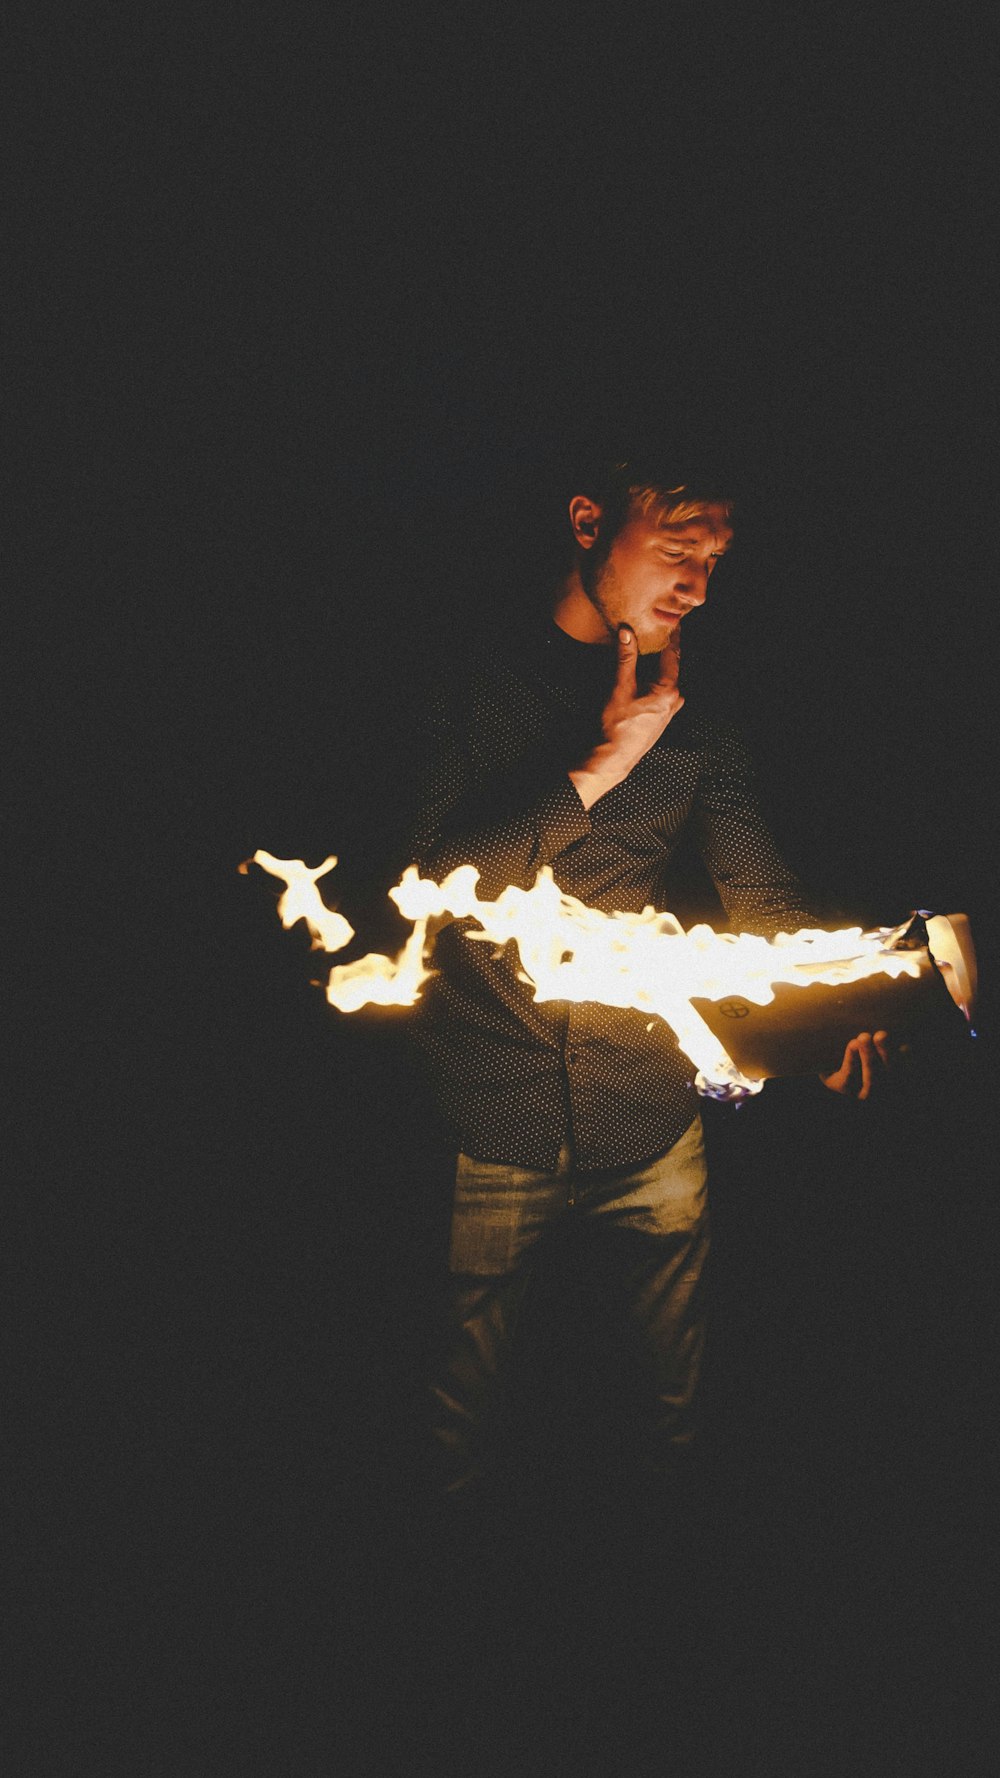 man playing with fire